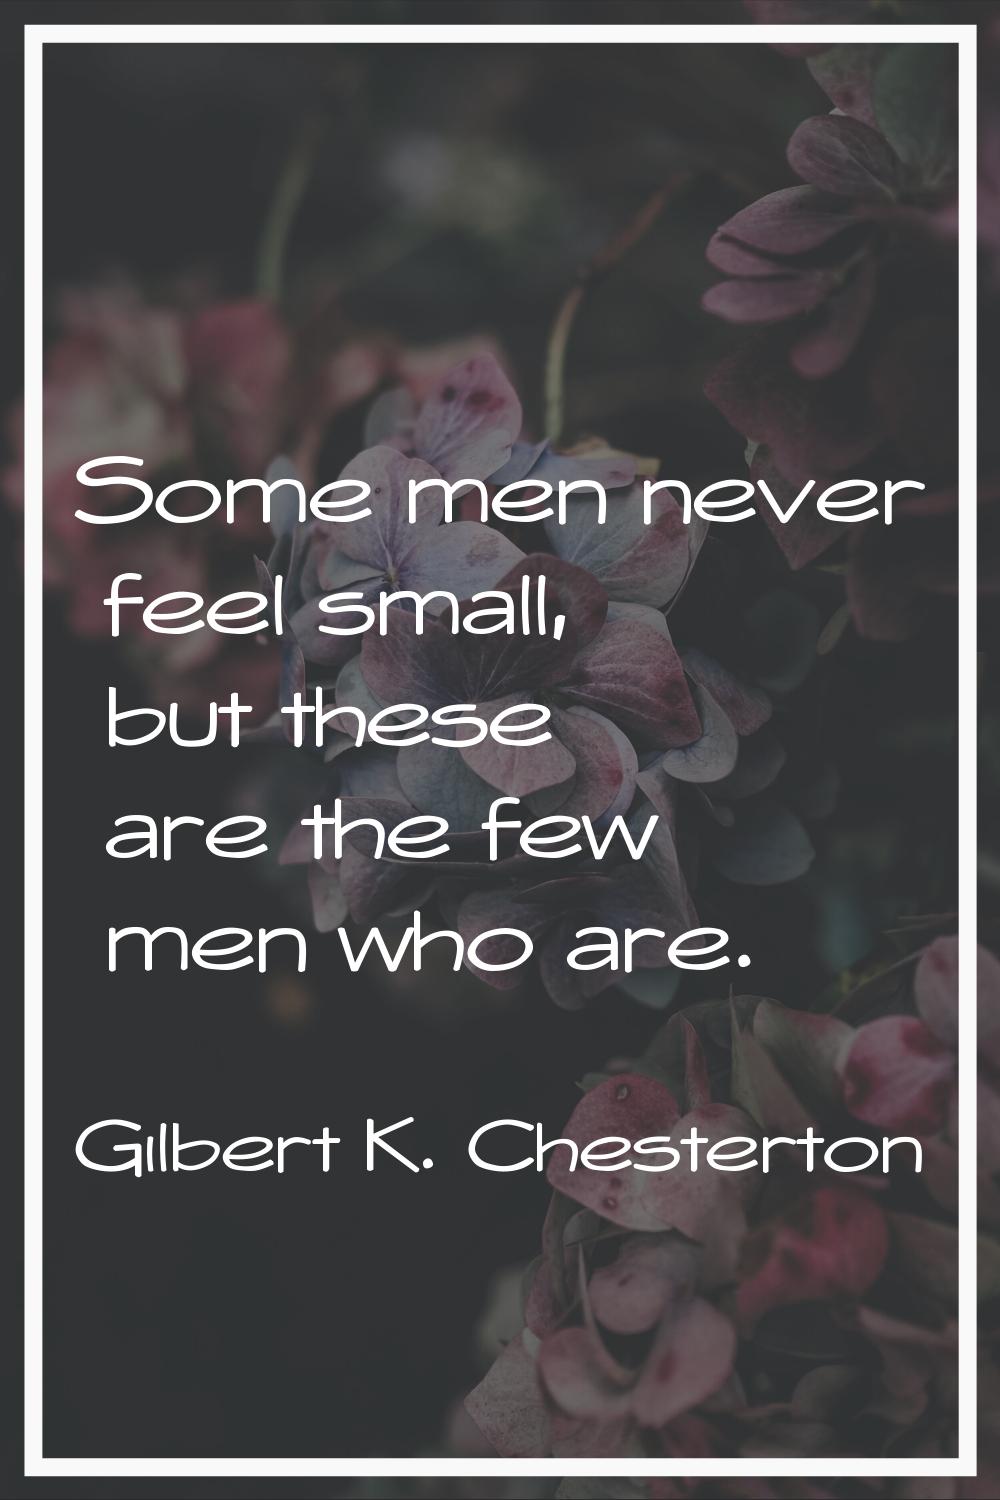 Some men never feel small, but these are the few men who are.